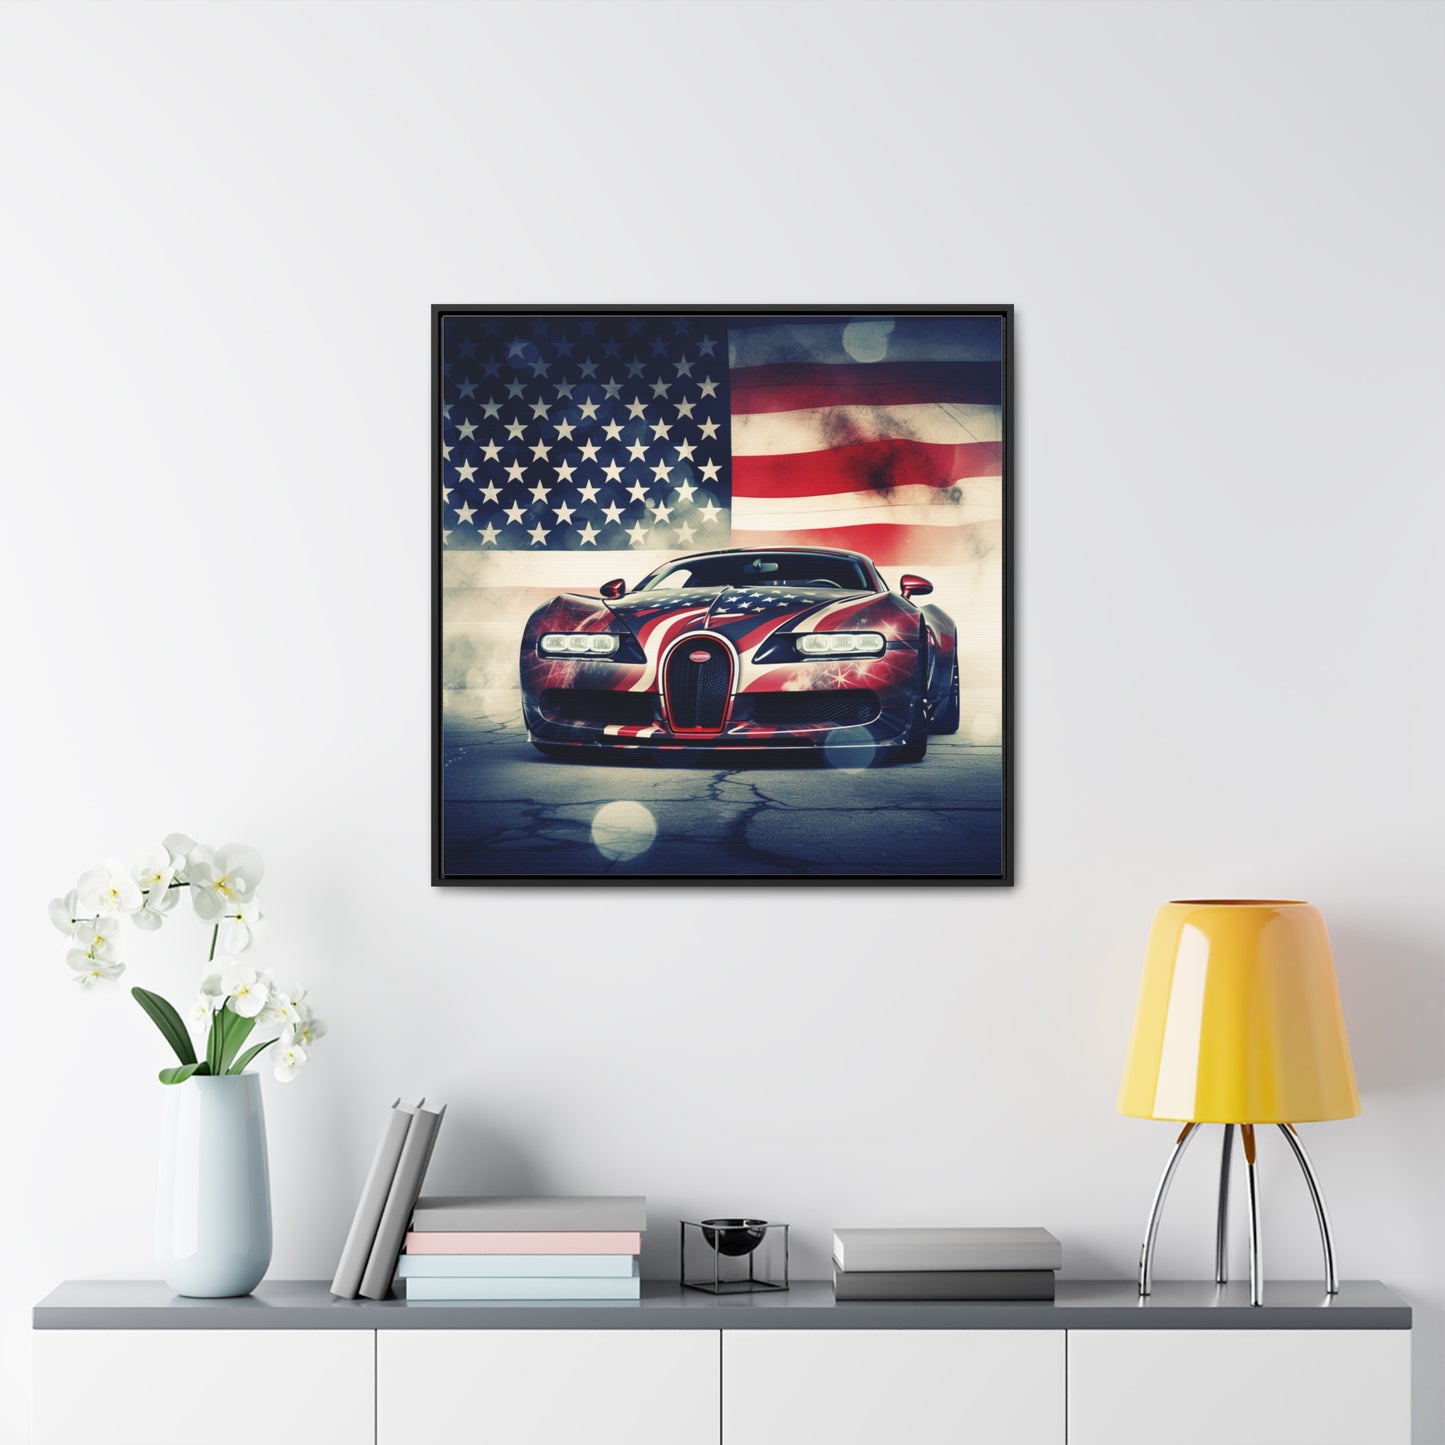 Gallery Canvas Wraps, Square Frame Abstract American Flag Background Bugatti 1